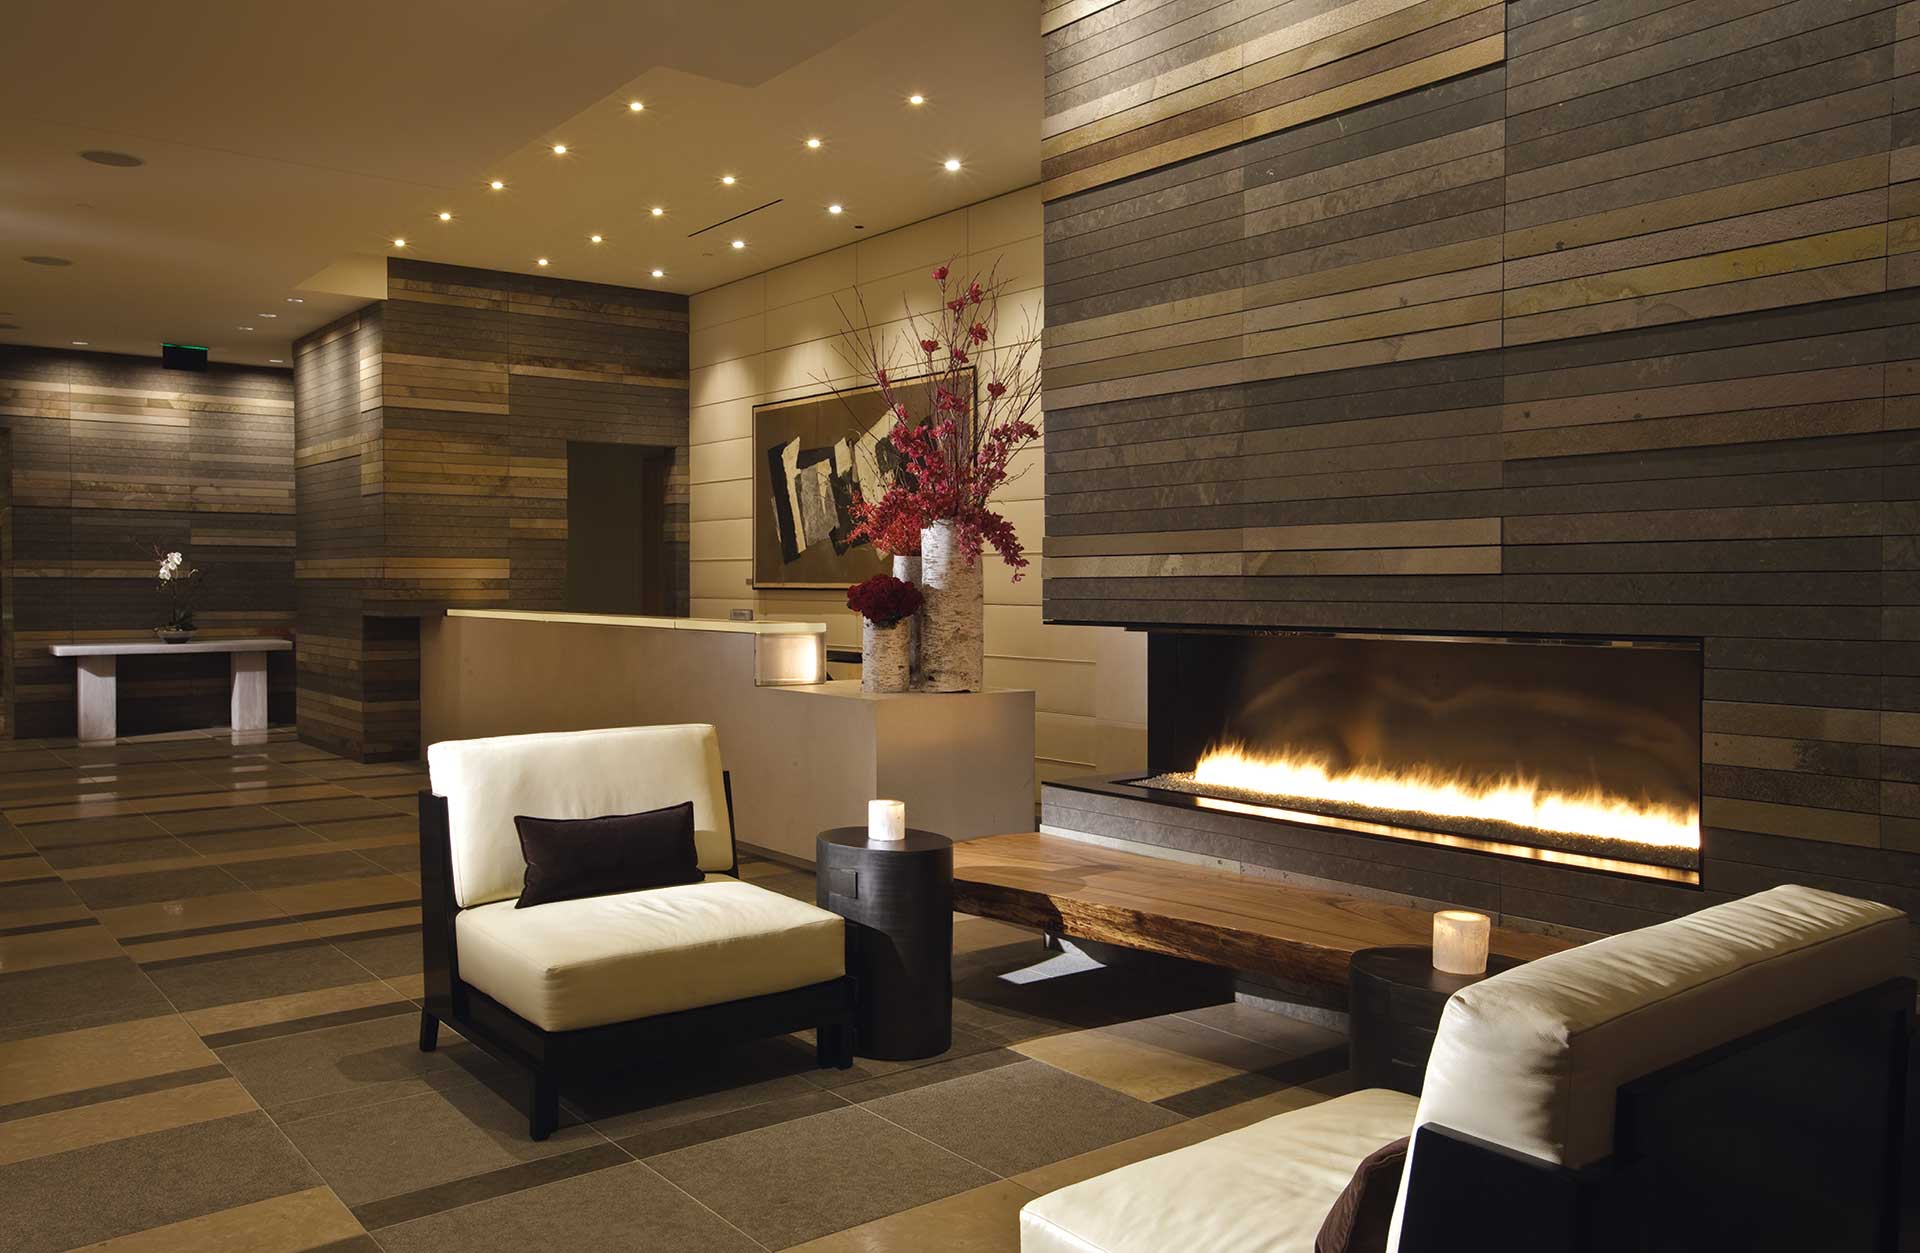 Four Seasons Hotel and Residences Seattle lobby with fireplace